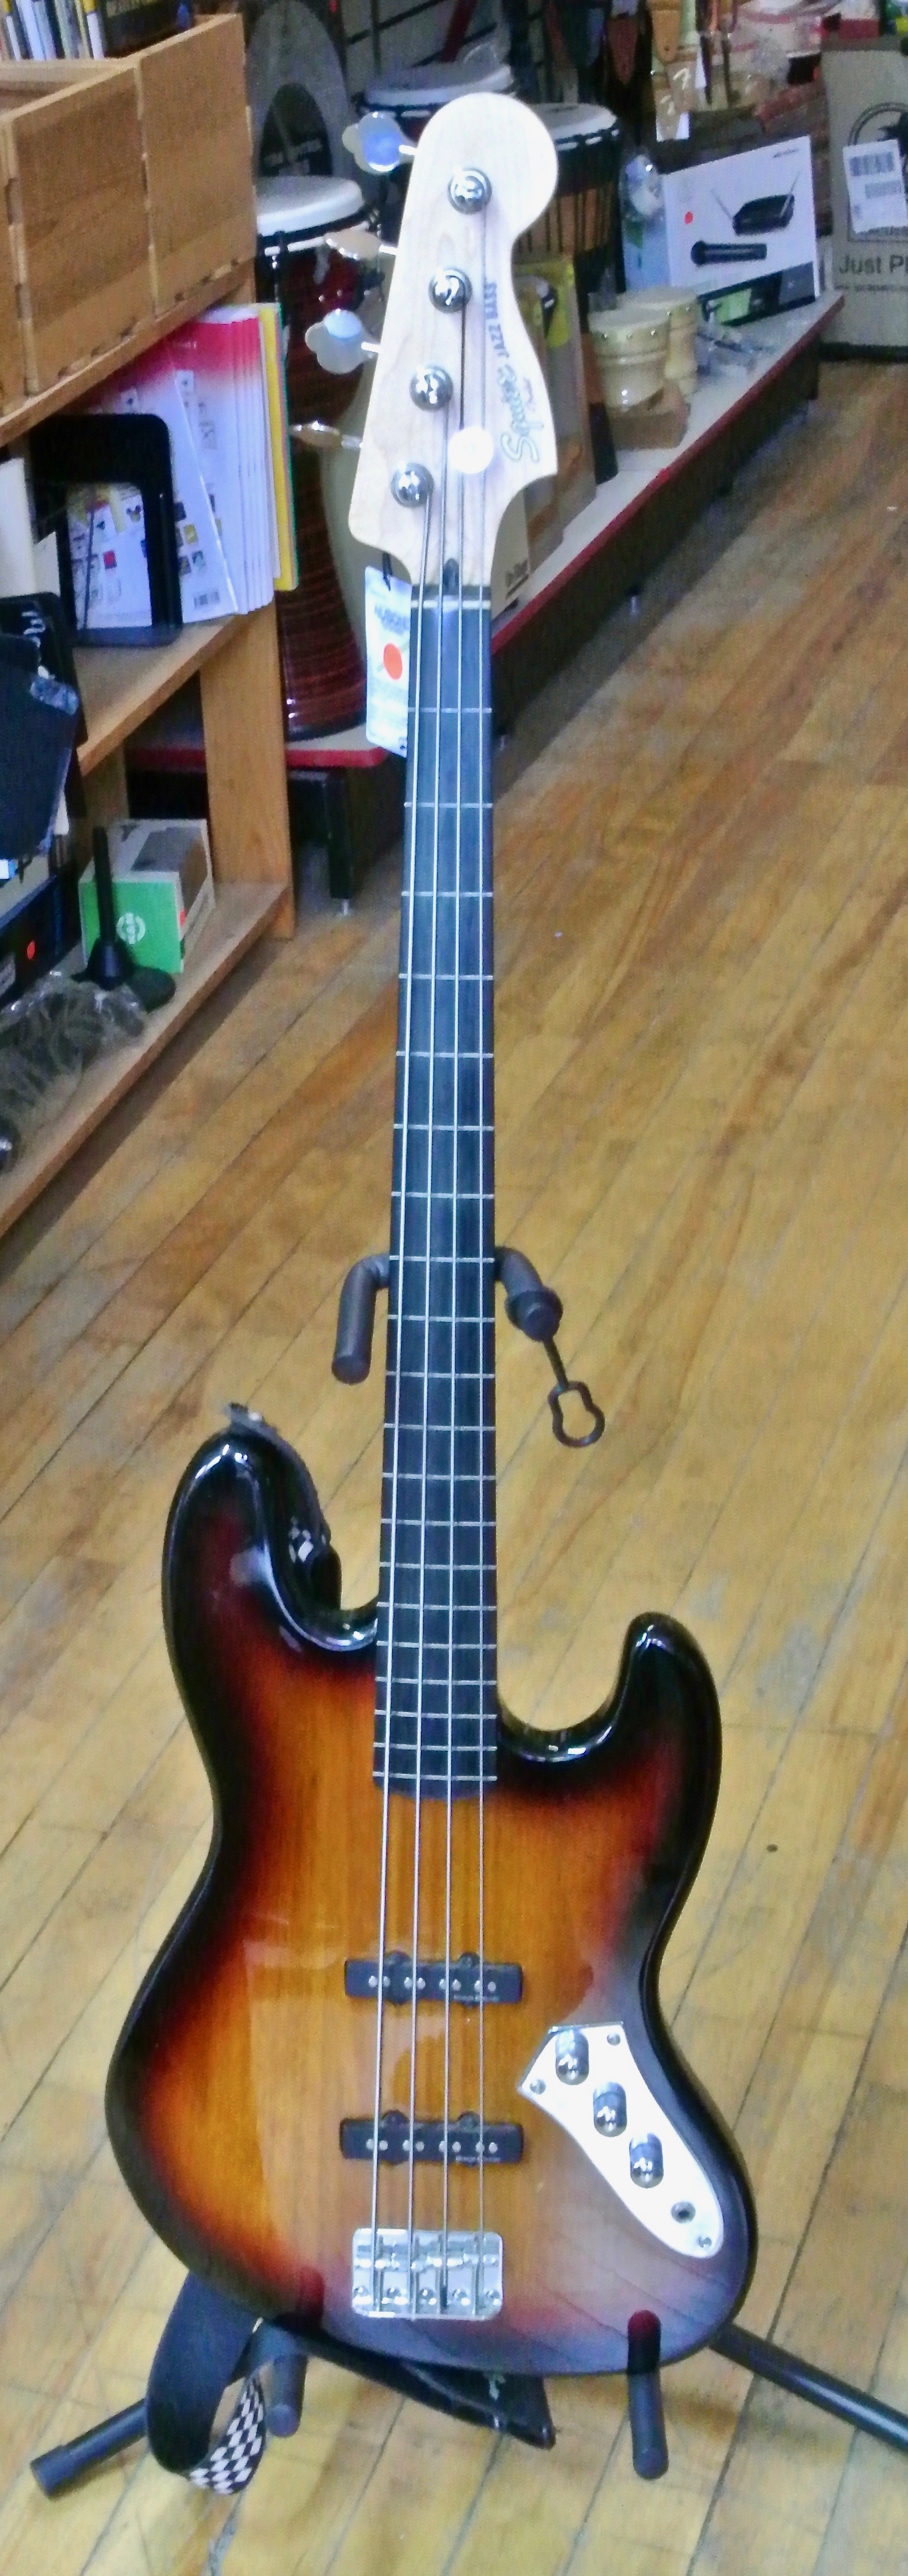 Used Fender Squire Fretless Jazz bass